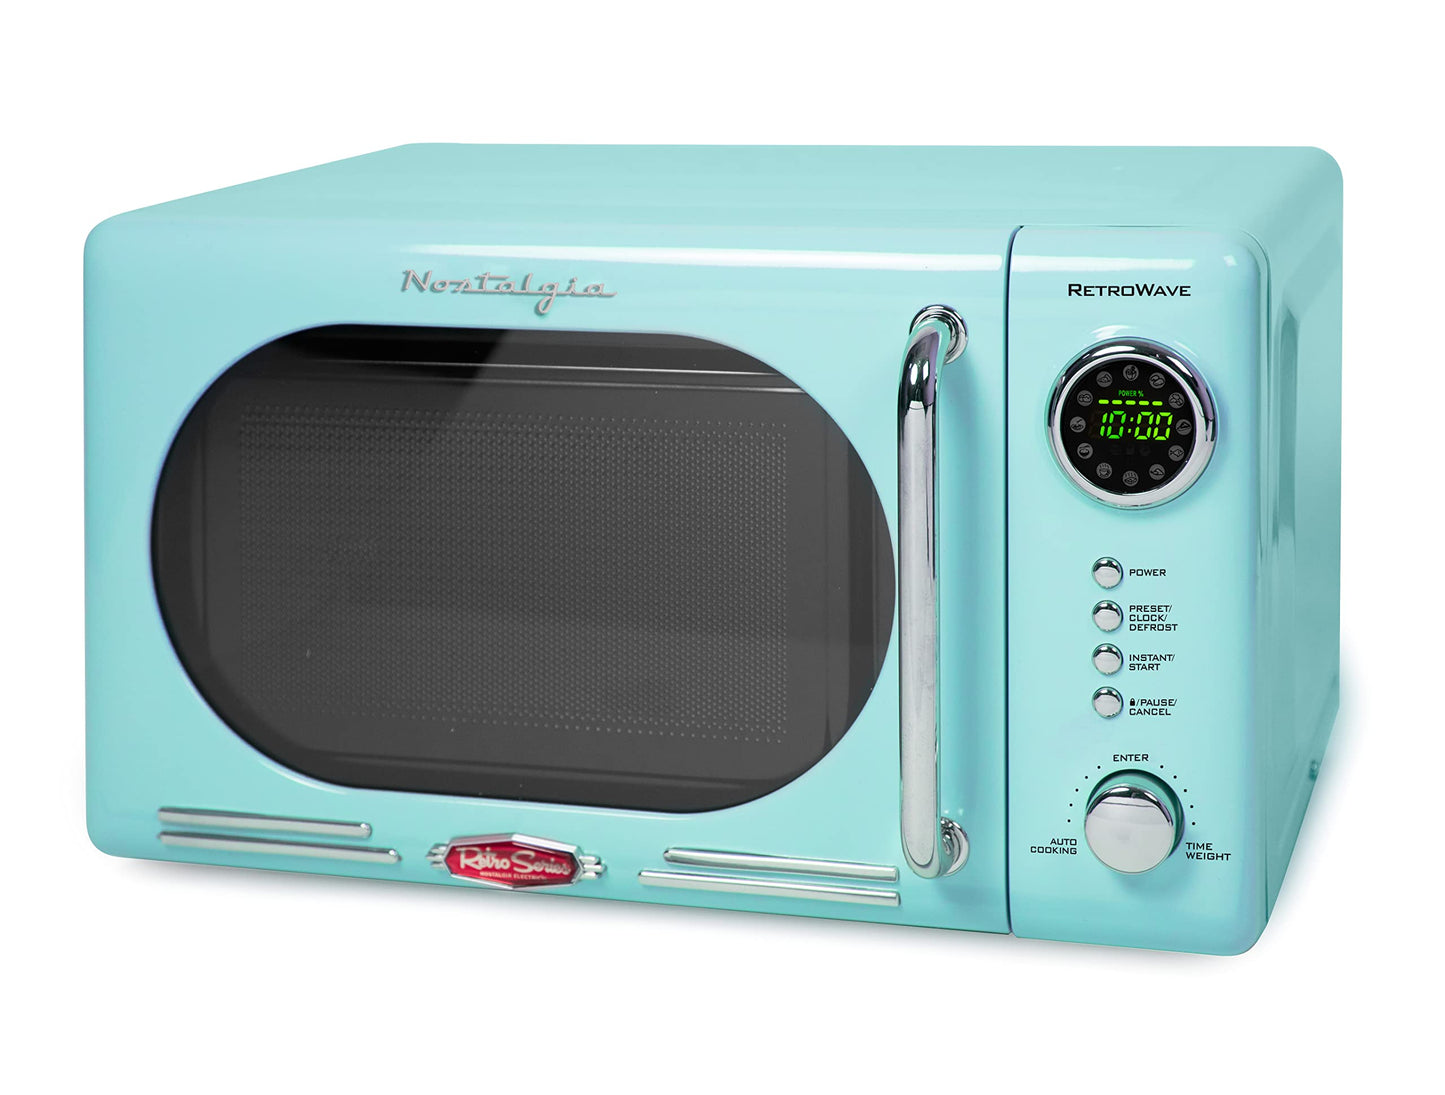 Nostalgia Retro Compact Countertop Microwave Oven, 0.7 Cu. Ft. 700-Watts with LED Digital Display & Retro Wide 2-Slice Toaster, Vintage Design With Crumb Tray, Cord Storage & 5 Toasting Levels, Aqua